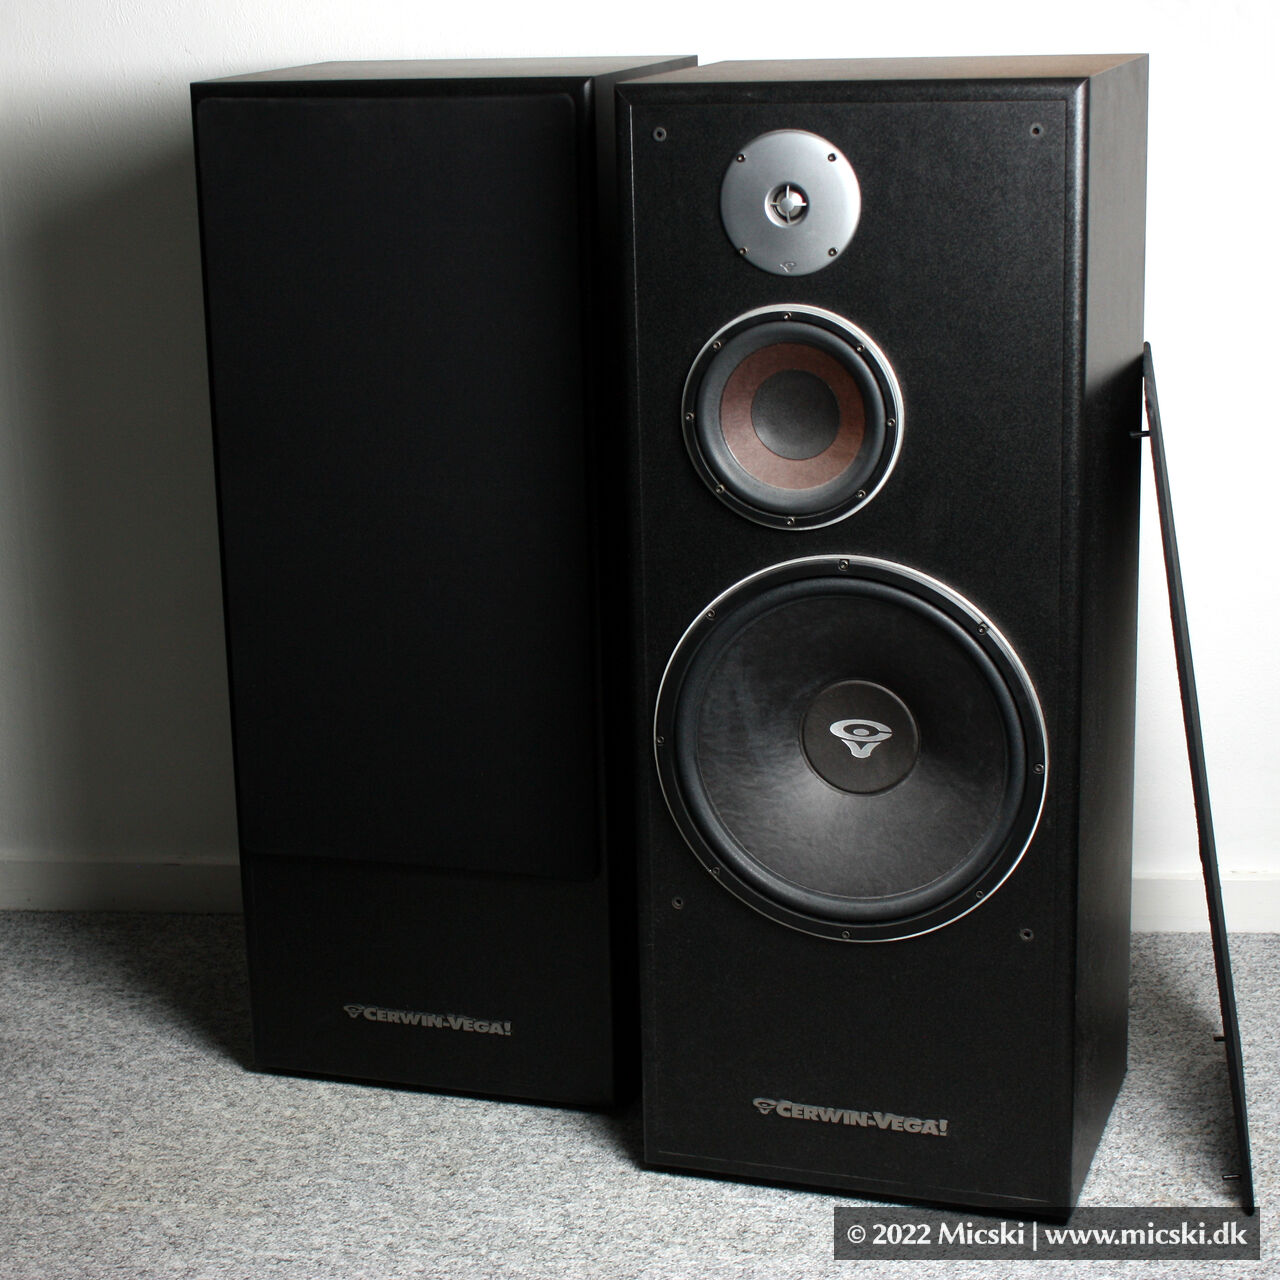 Picture of Cerwin-Vega AL-1002 floorstanding speaker with 15 inch woofer, 8 inch midwoofer and 1,5 inch tweeter as seen from the front.